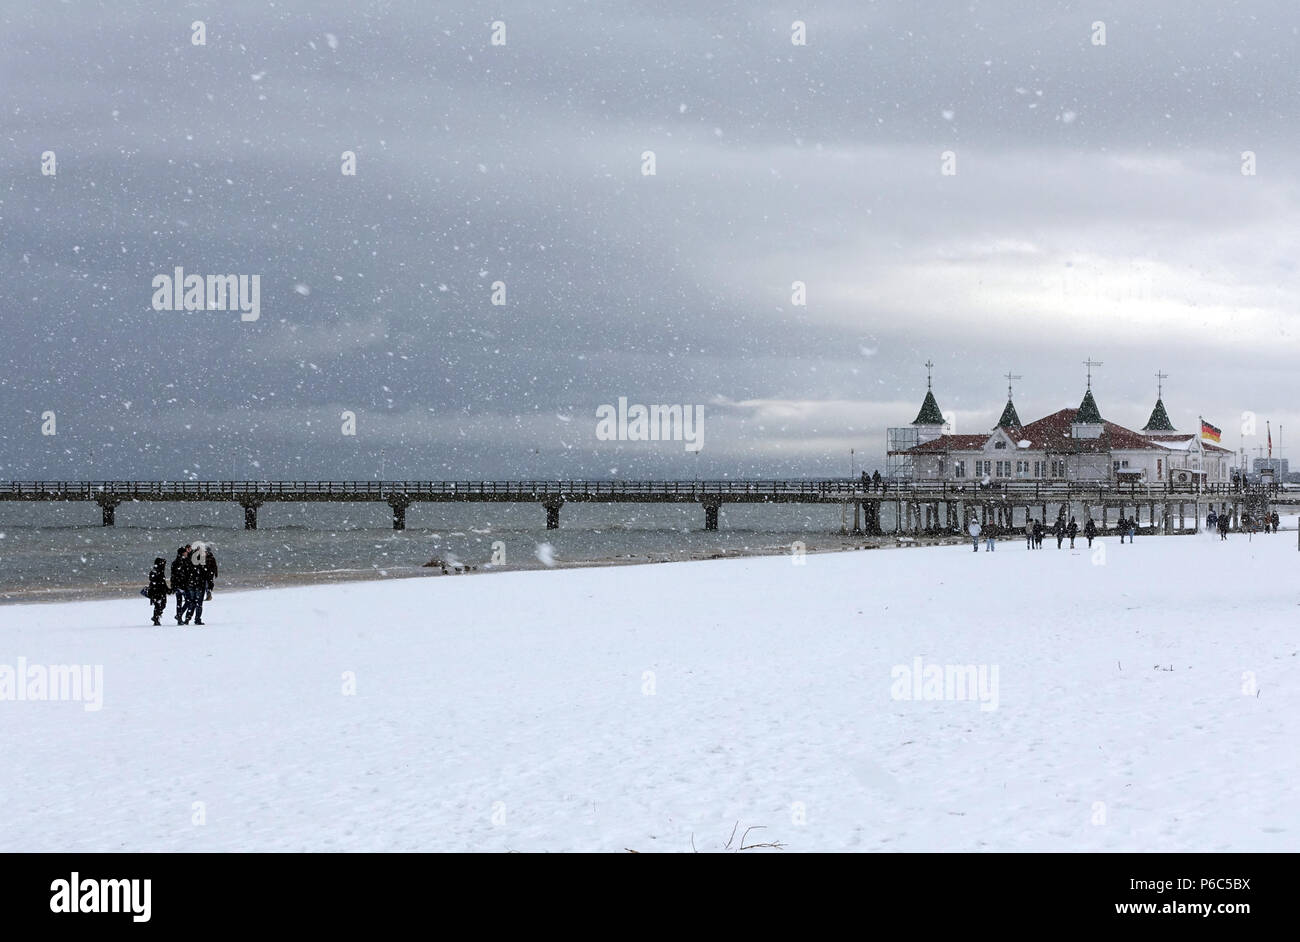 Ahlbeck, Germany, view of the sea bridge in winter in snowfall Stock Photo